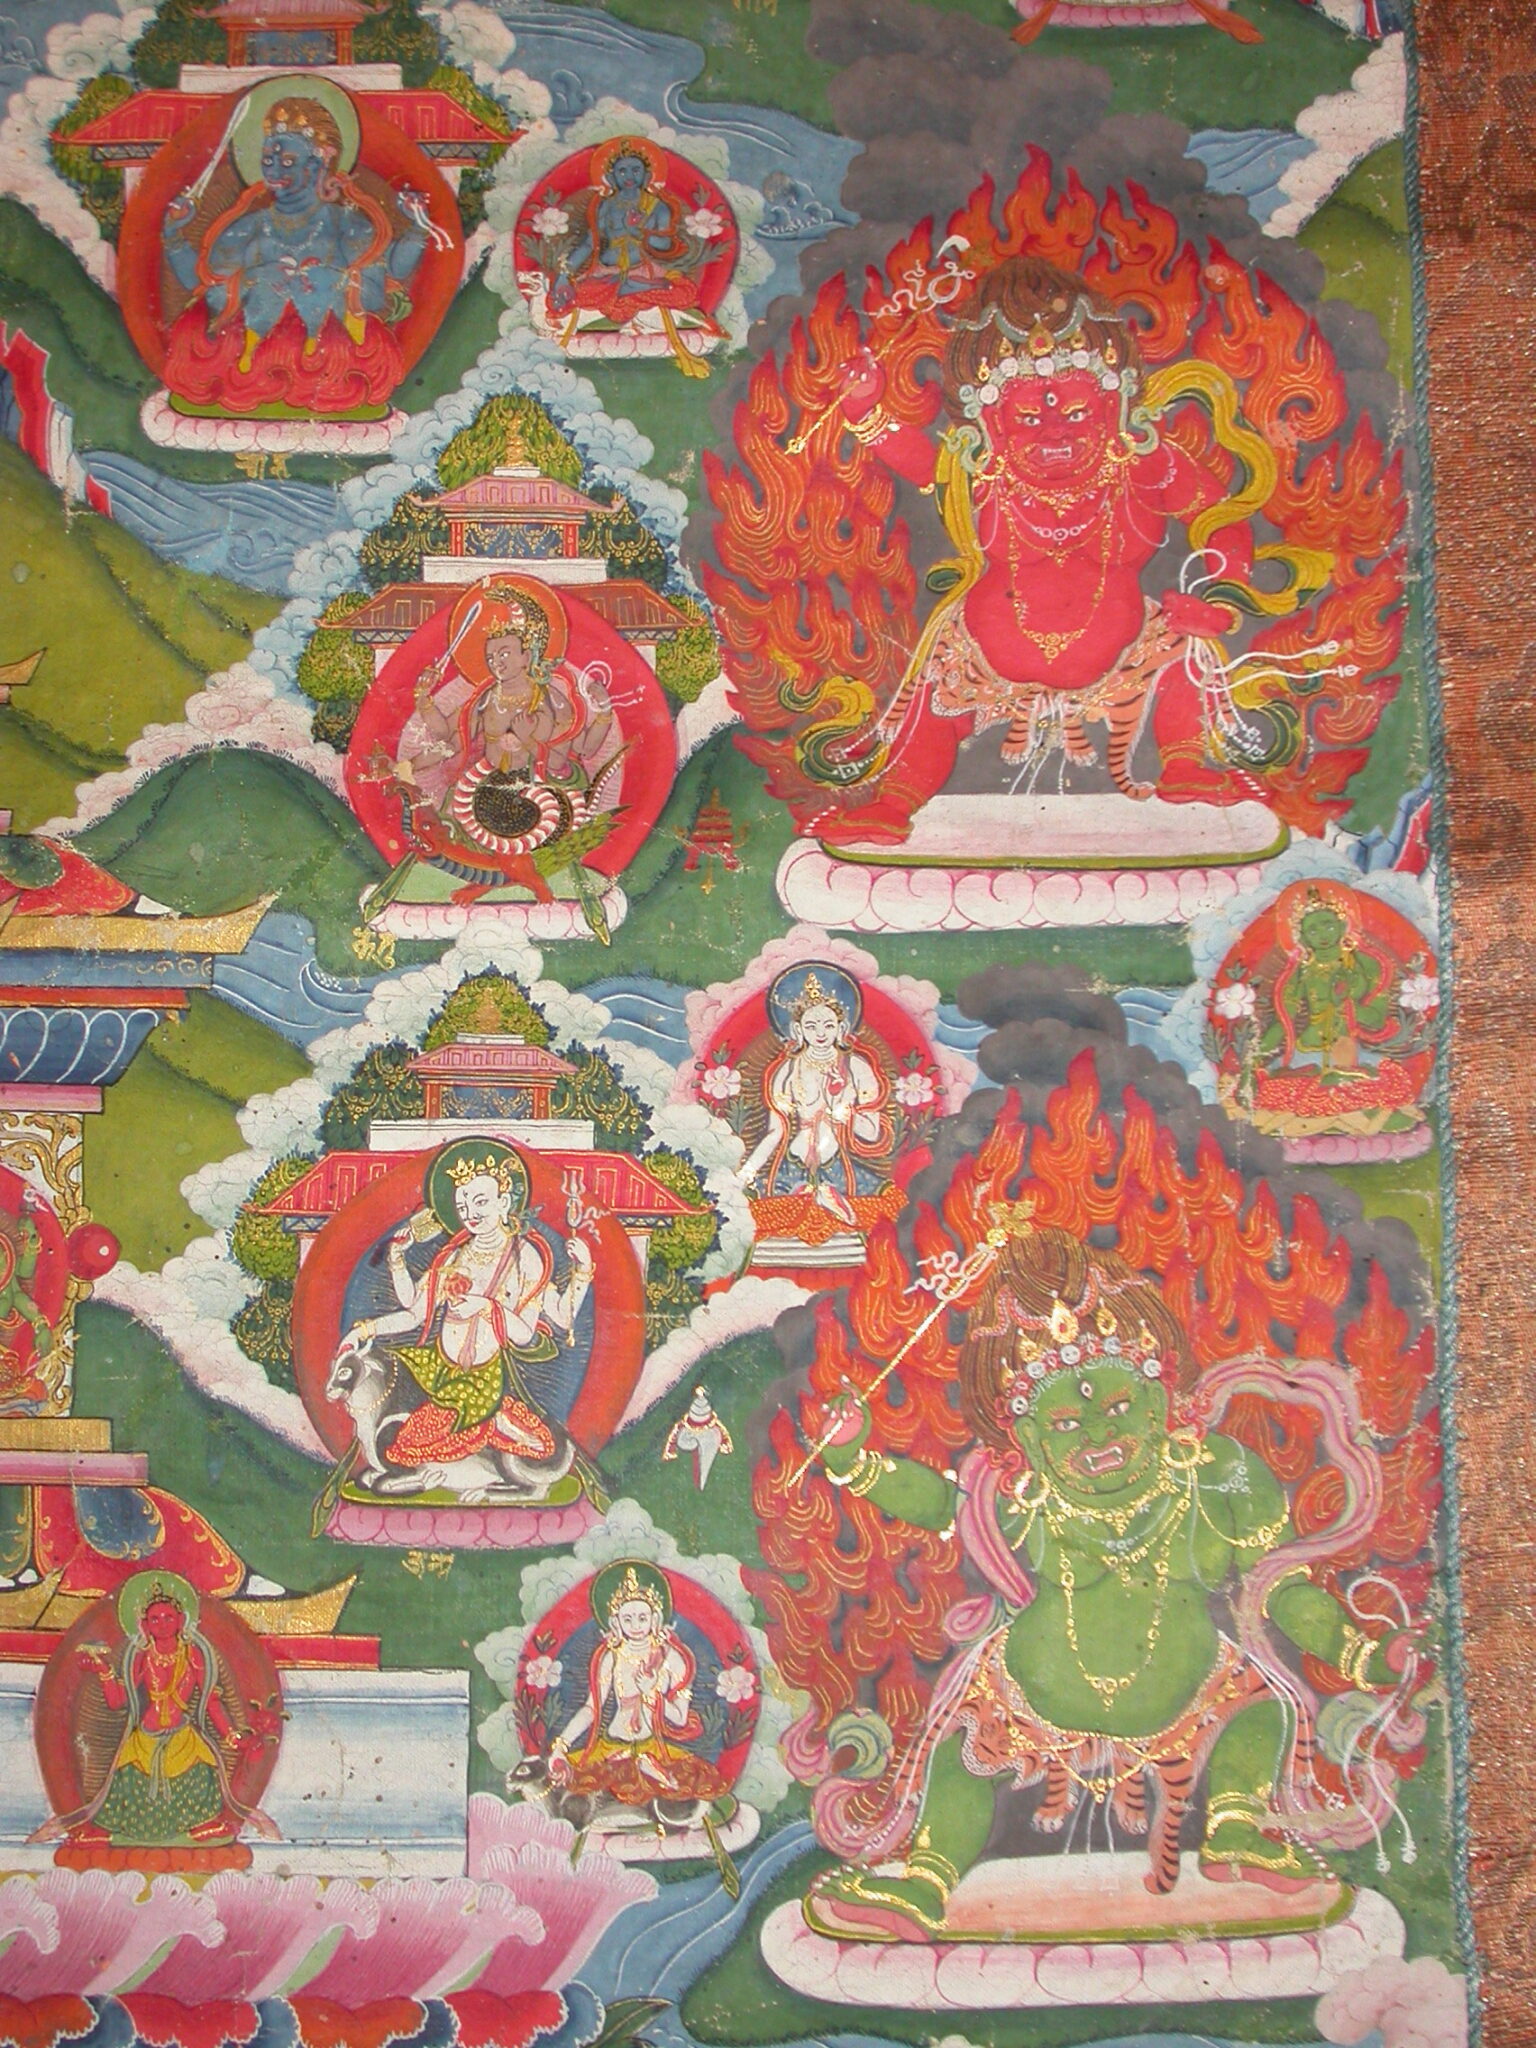 Portraits depicting red- and green-skinned wrathful deities with fiery nimbuses and eight planetary deities